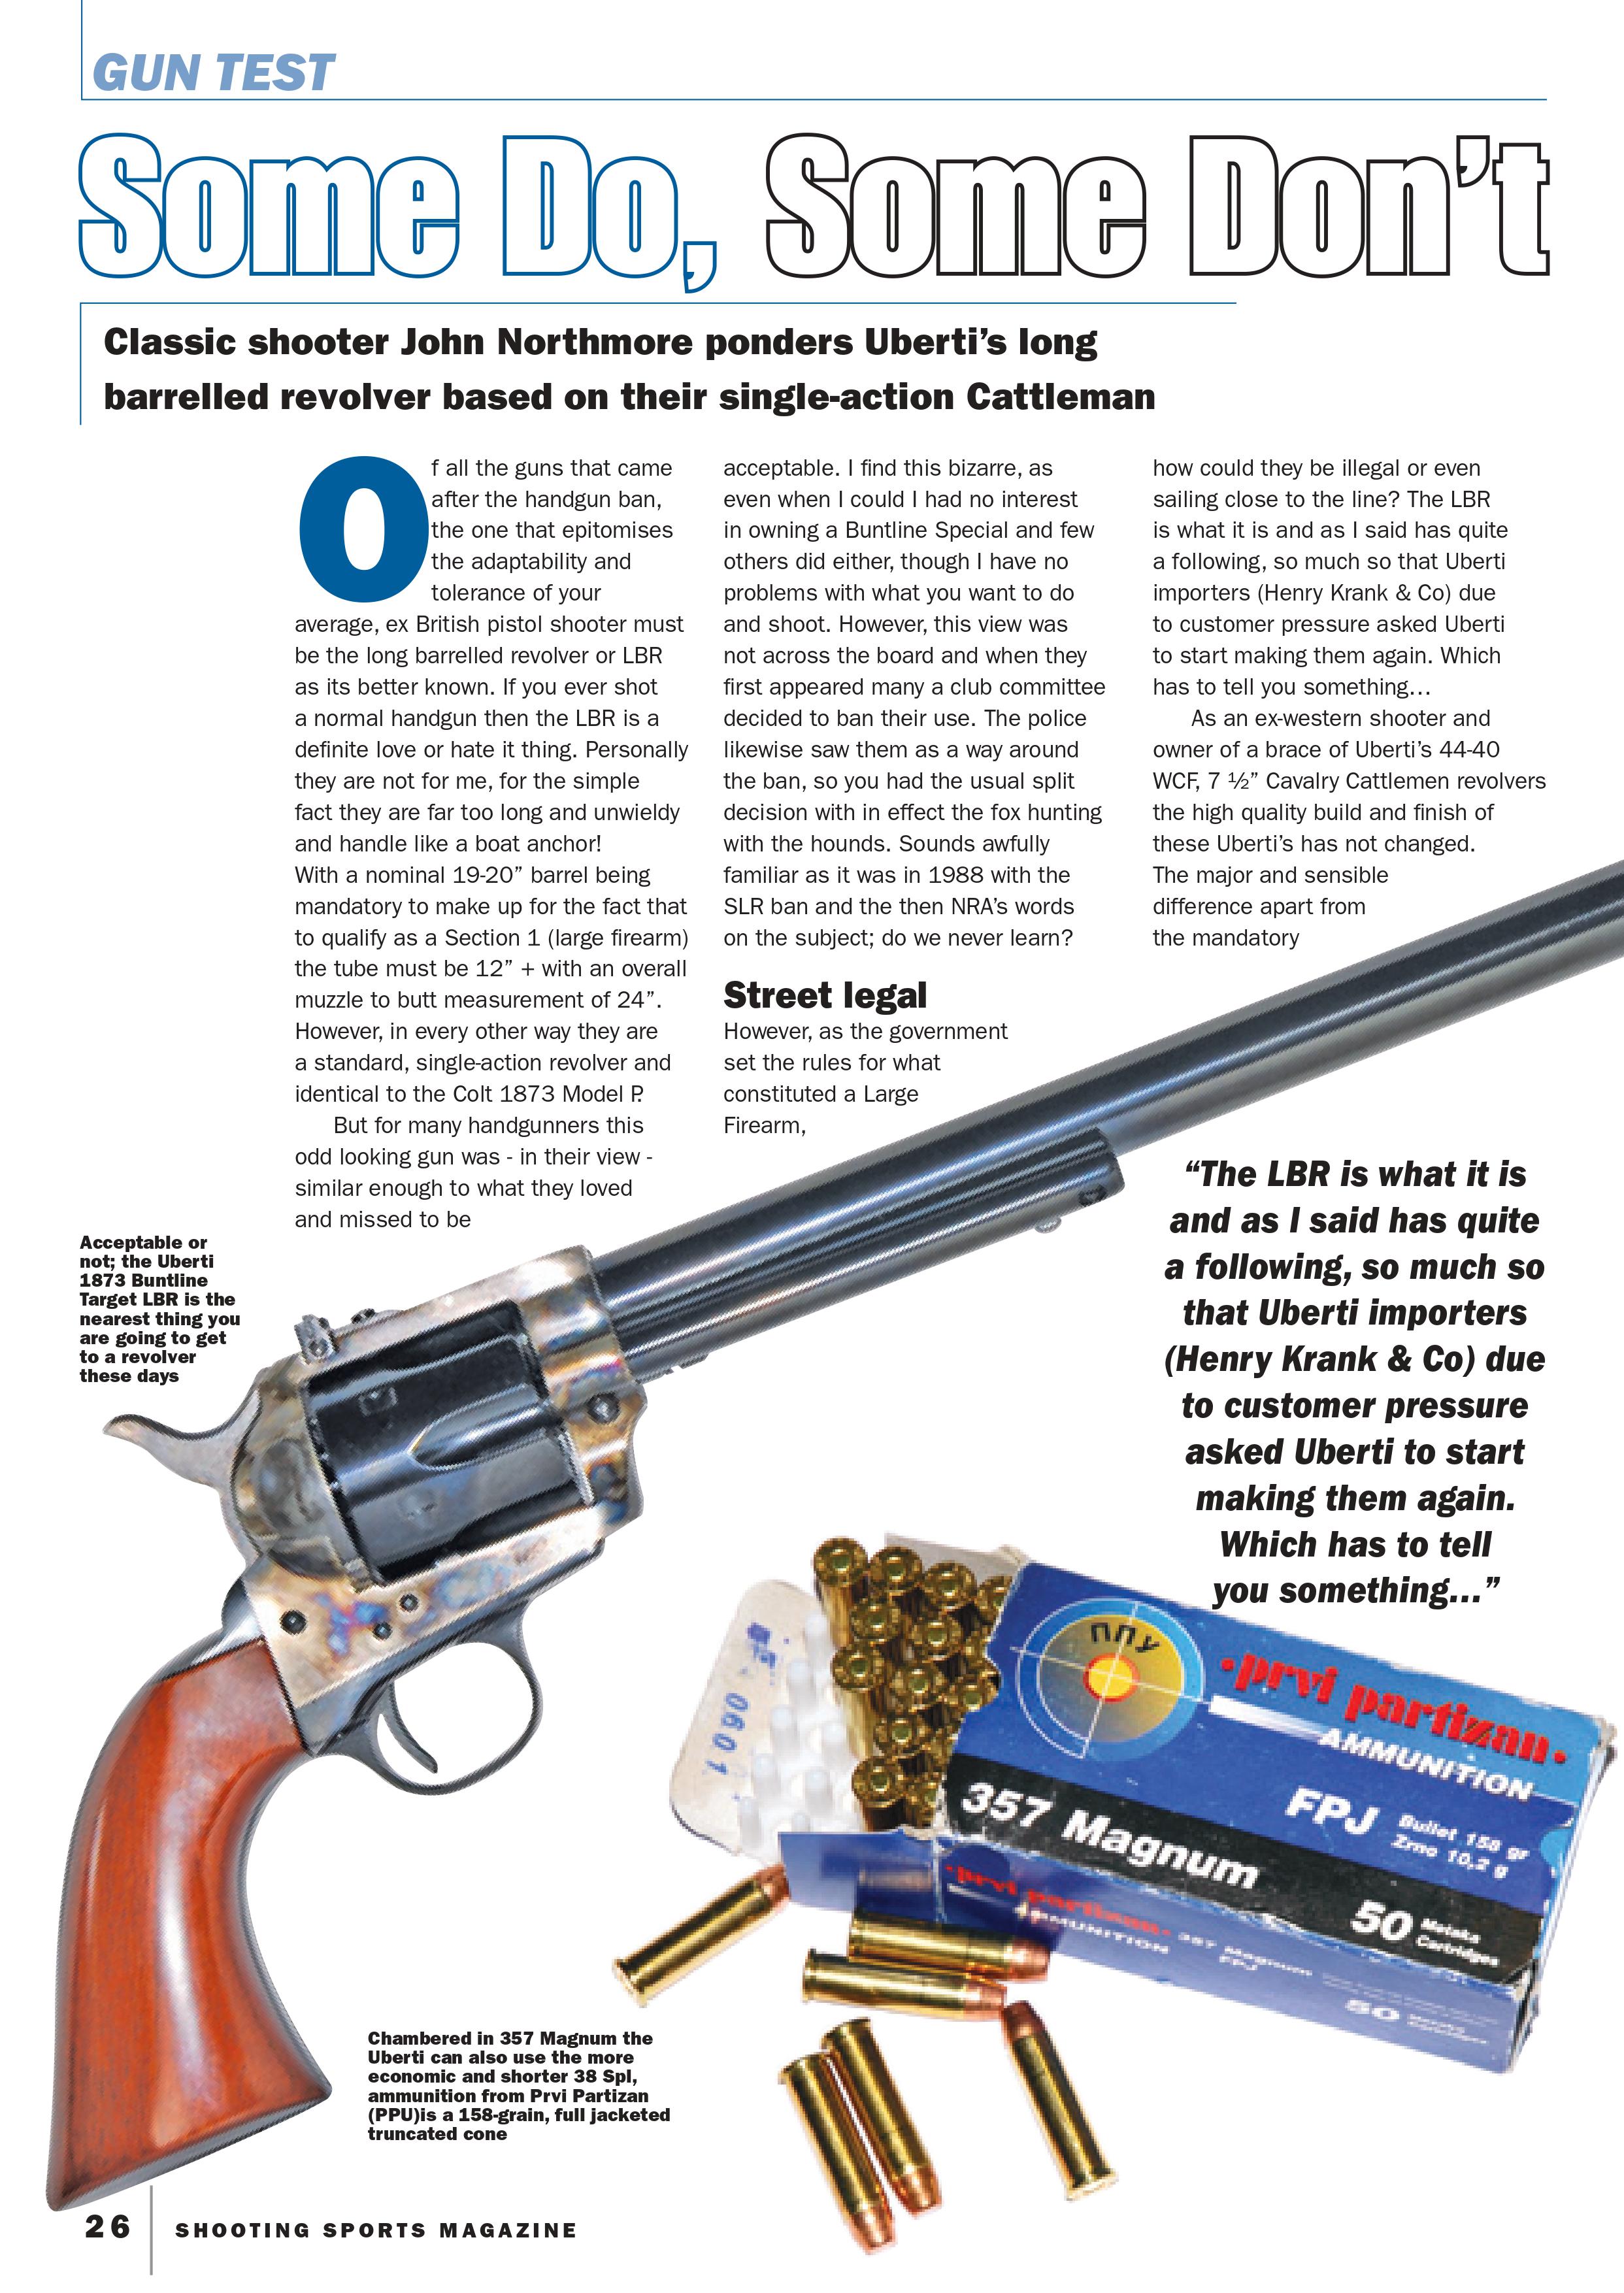 shooting sports article page one